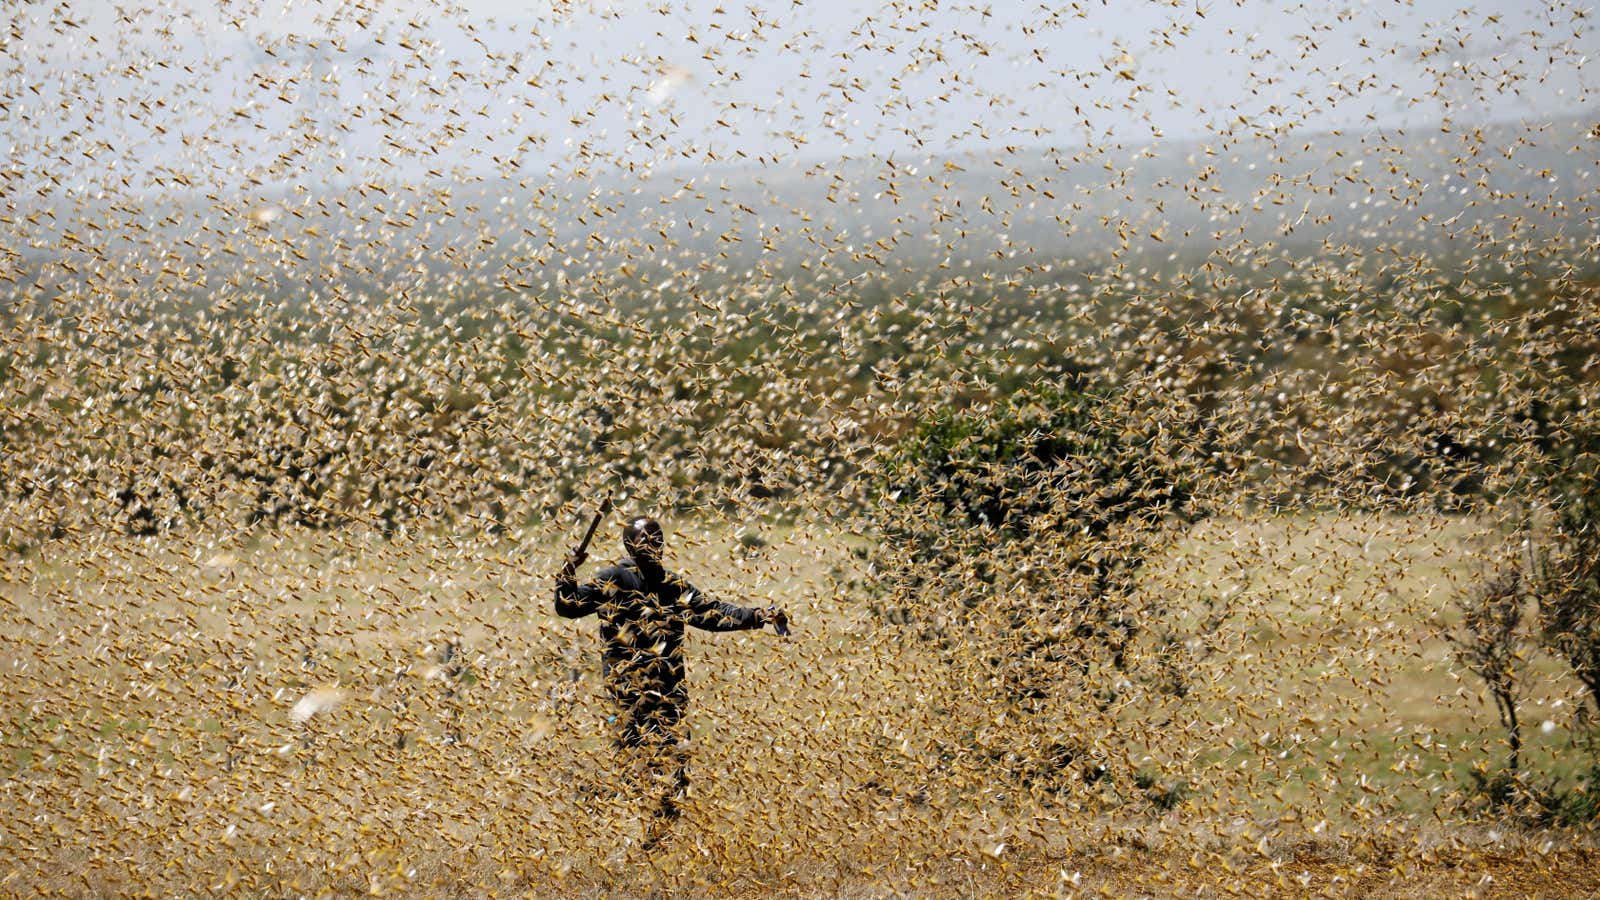 A man attempts to fend-off a swarm of desert locusts at a ranch near the town of Nanyuki in Laikipia county, Kenya, Feb. 21, 2020.